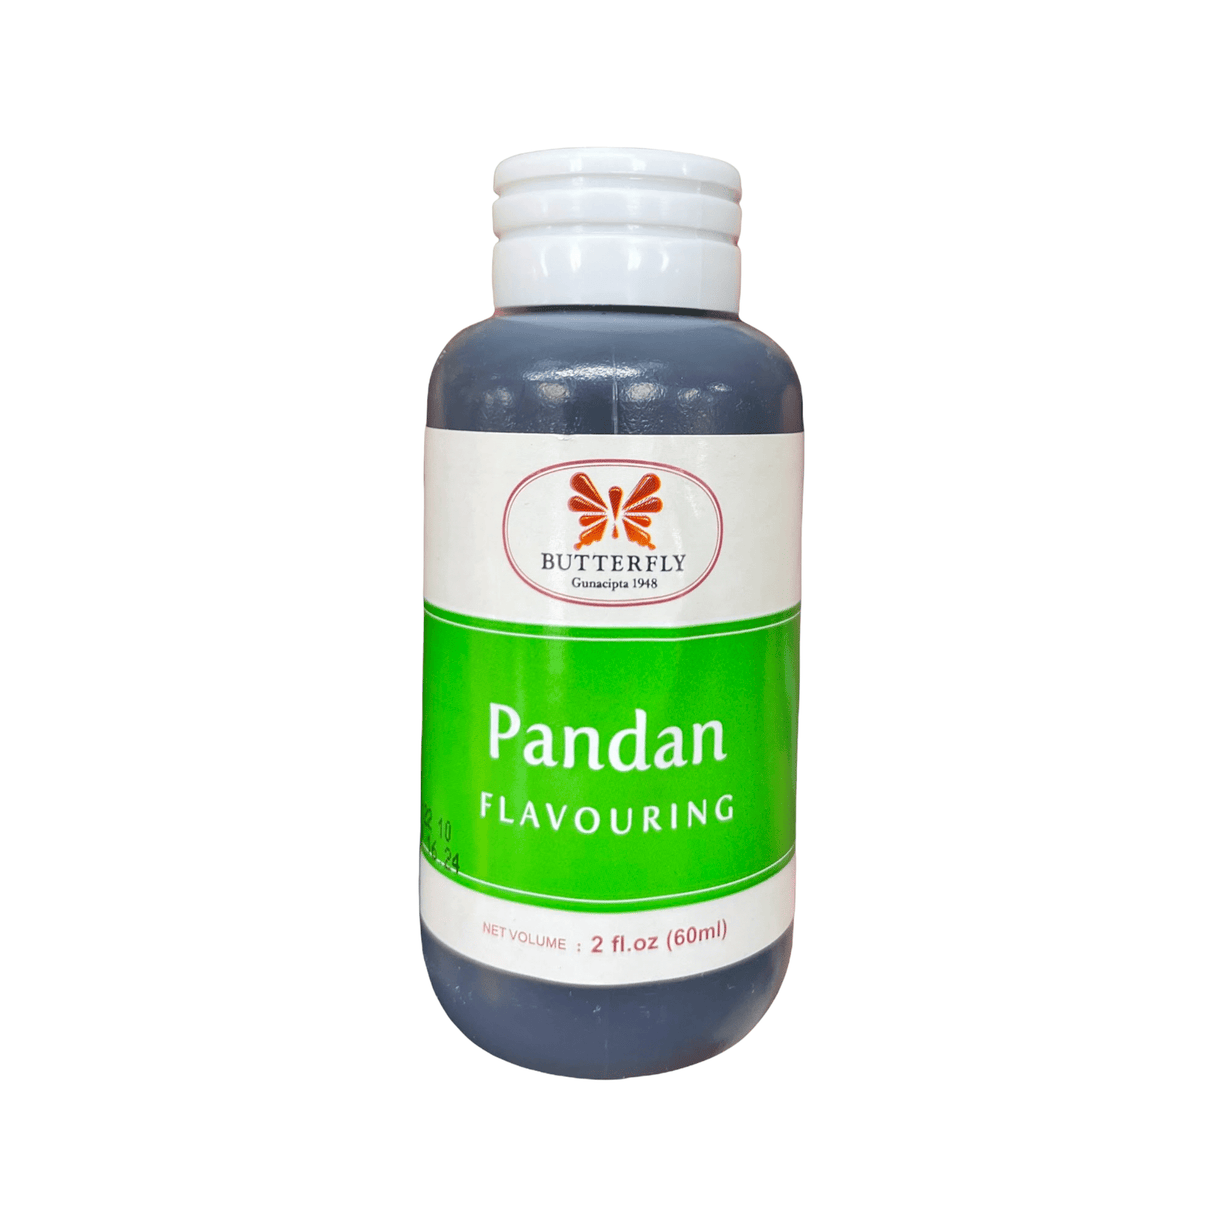 Butterfly Pandan Flavouring